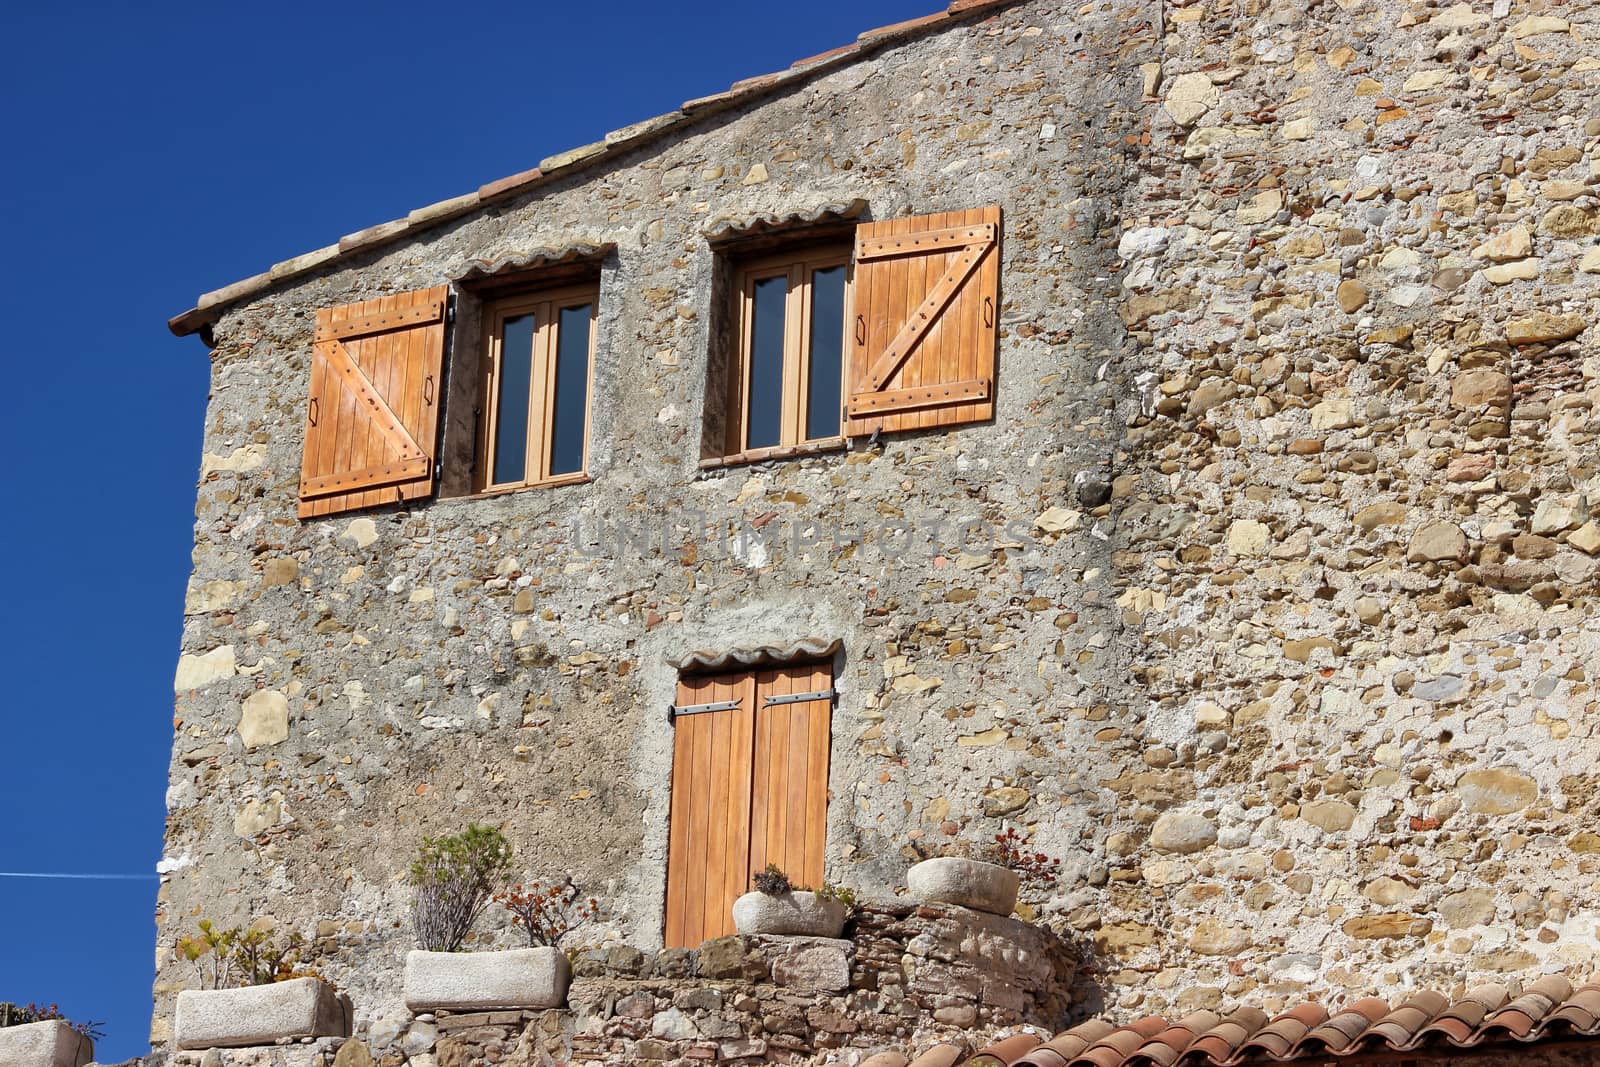 Facade of French House with Door and Windows in Roquebrune-Cap-Martin, France